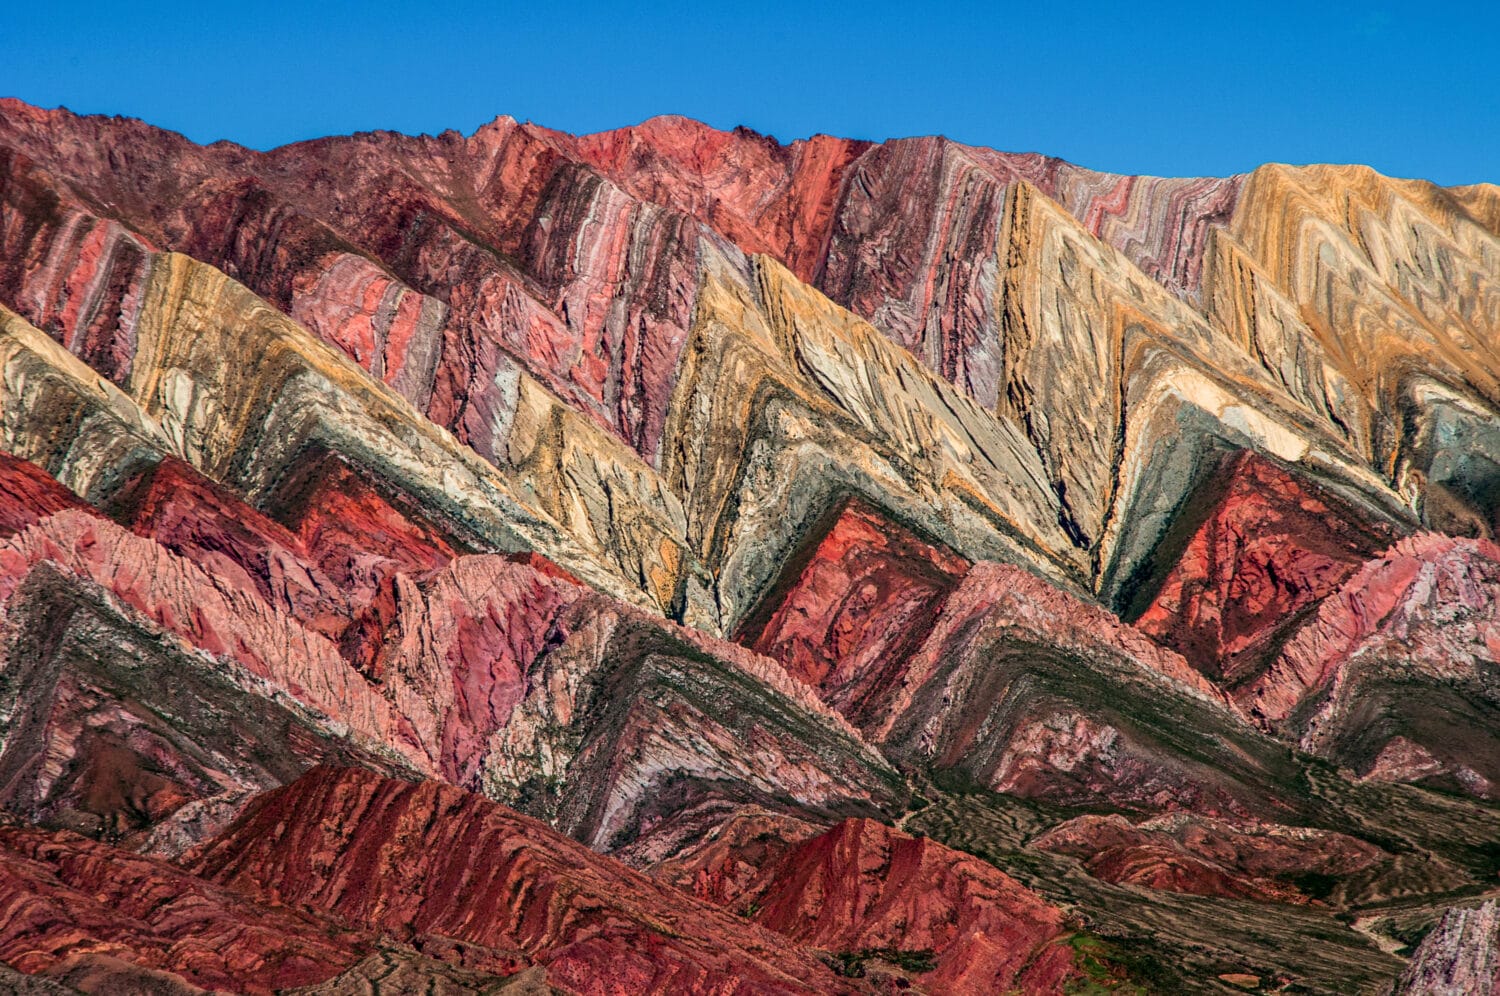 Overlook view to the colorful Serranía de Hornocal  near Humahuaca in north of Argentina